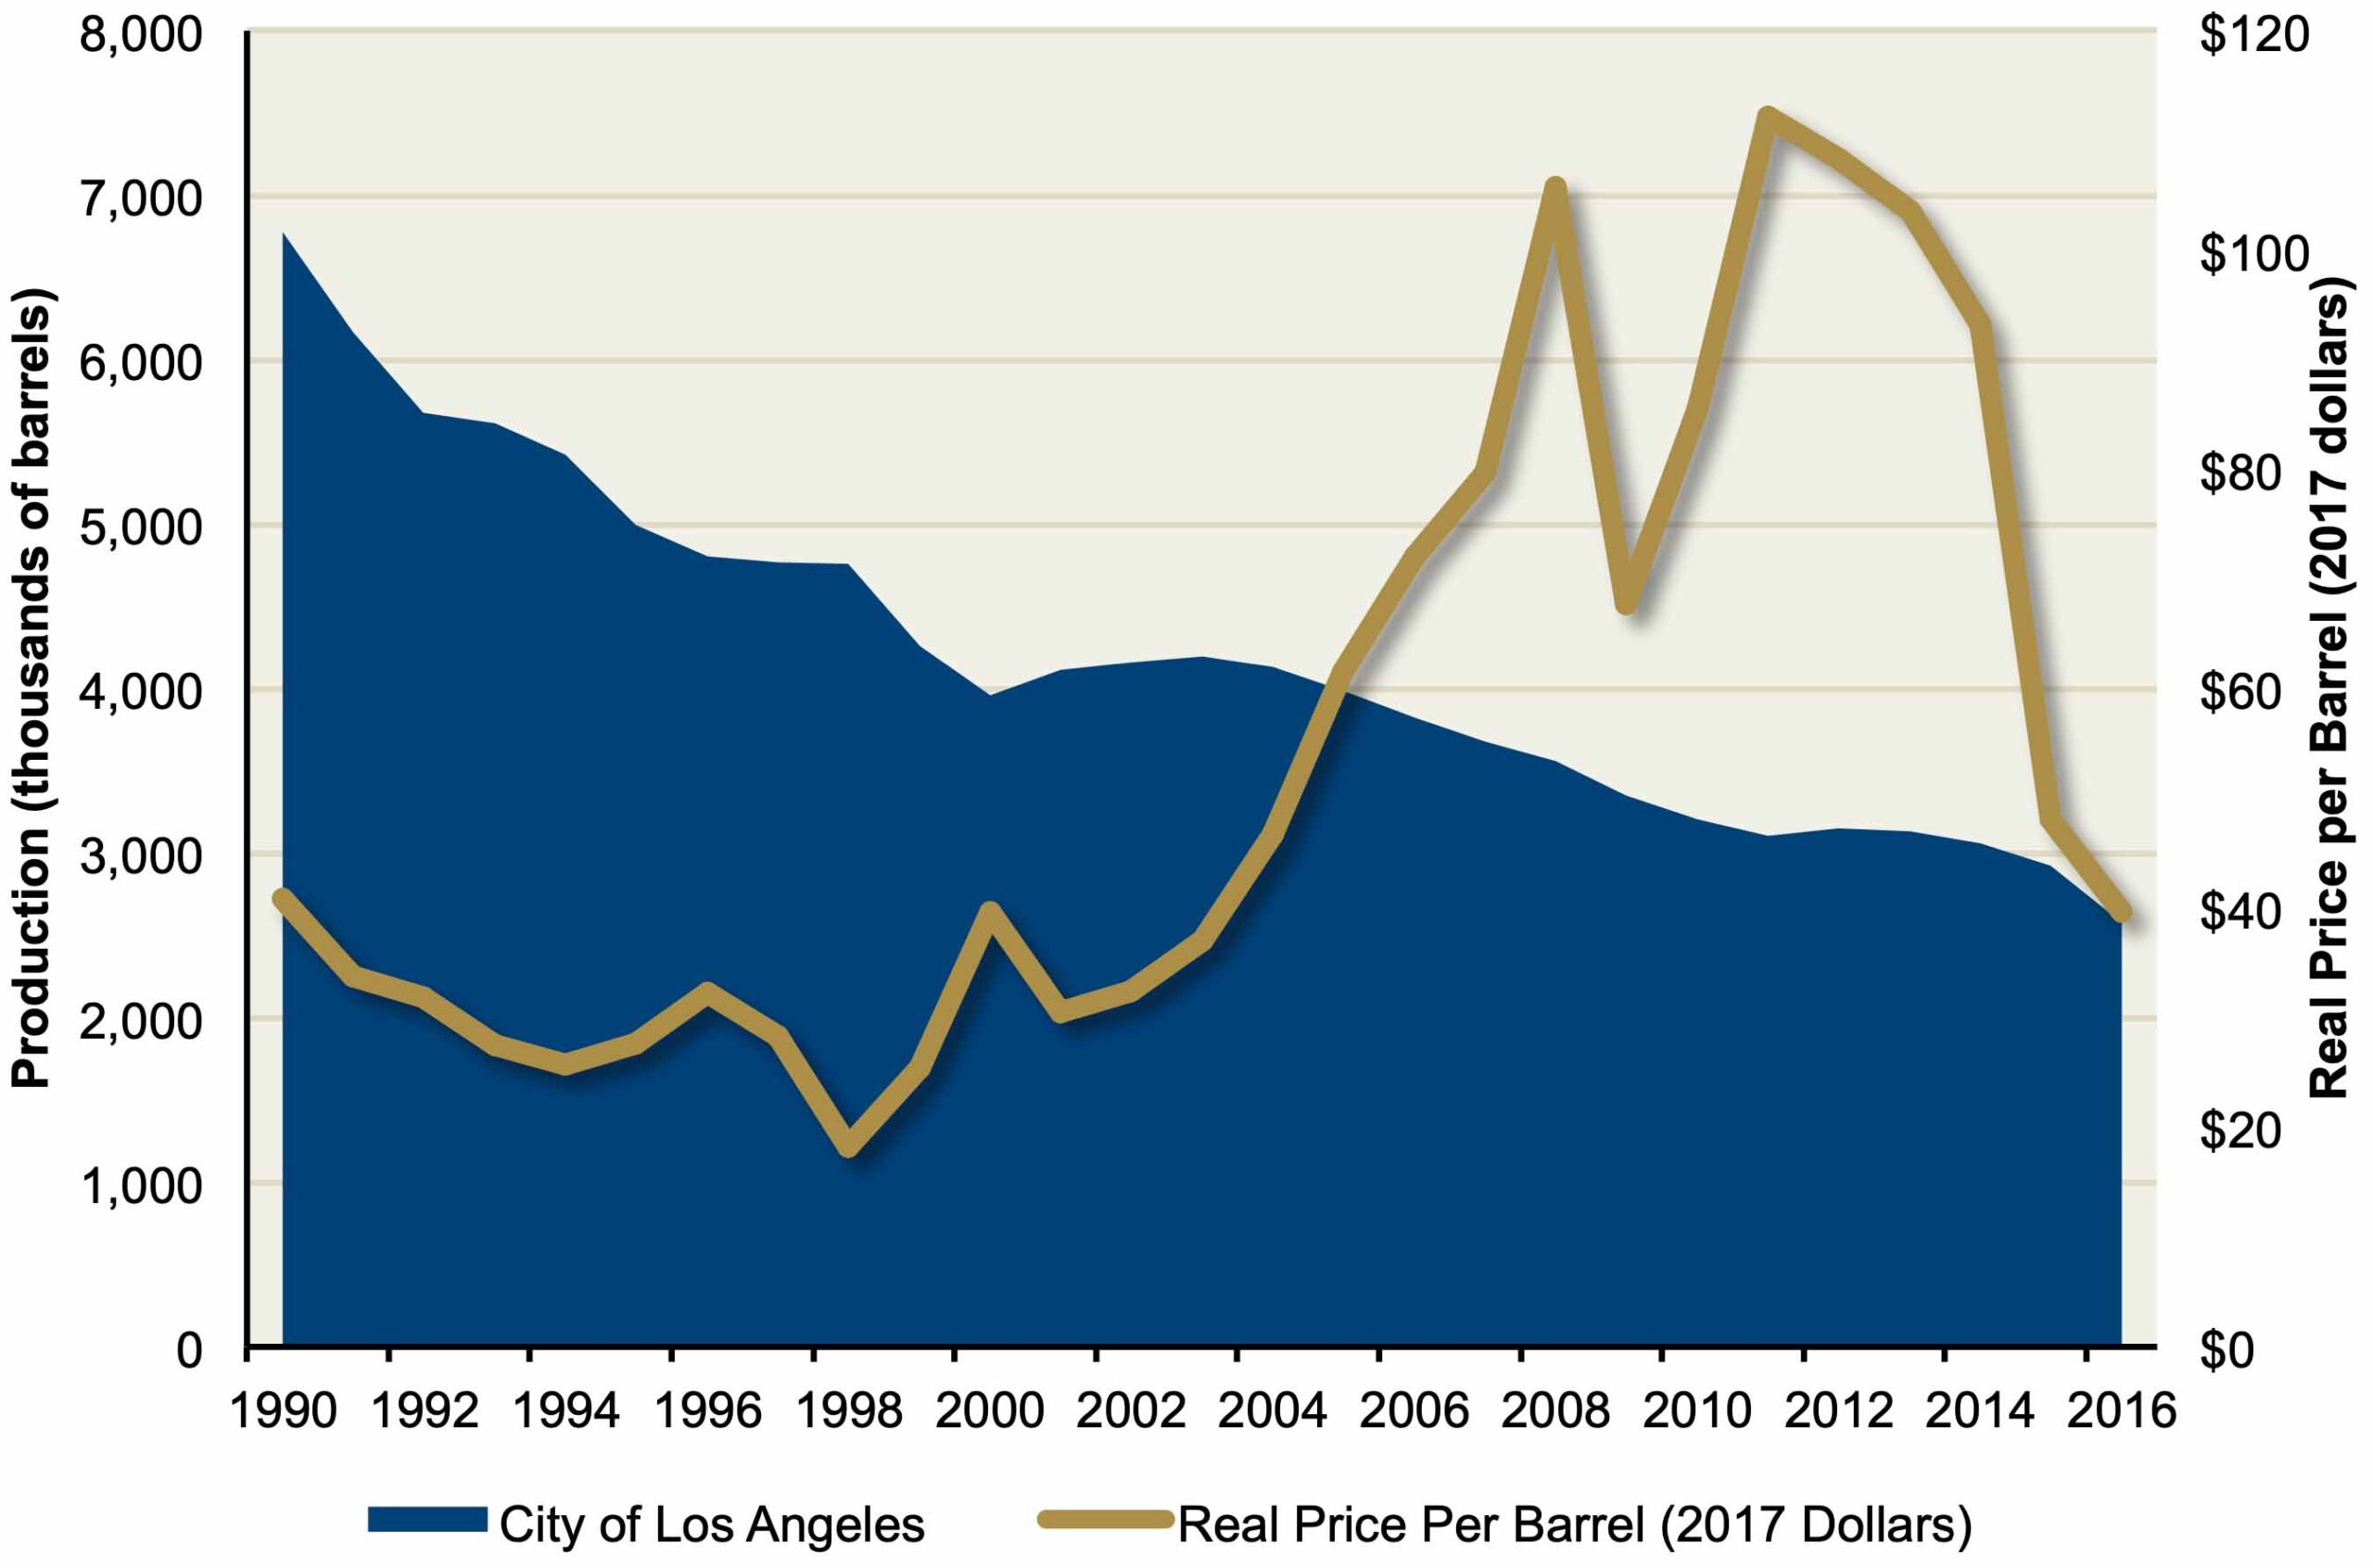 Oil Production and Prices - Los Angeles City chart